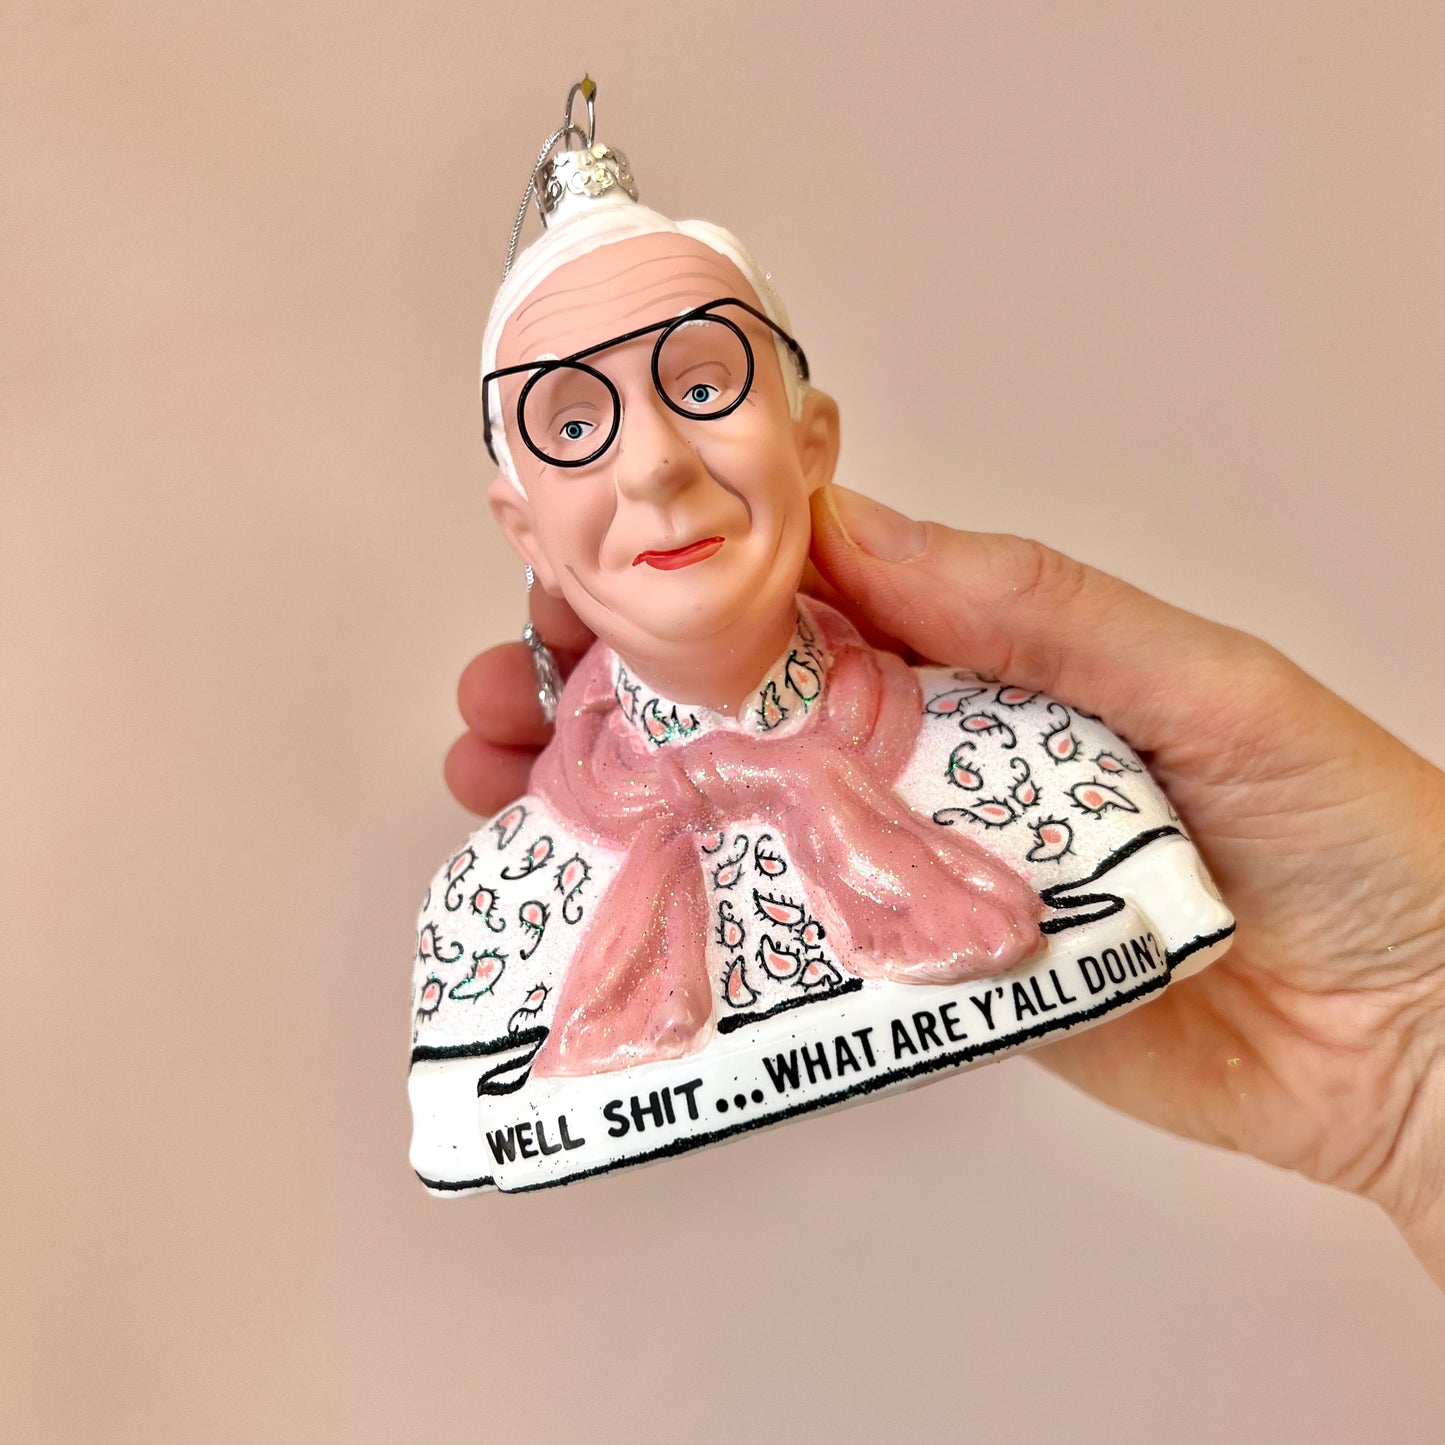 Leslie Jordan “well shit…what are y’all doin?” Ornament